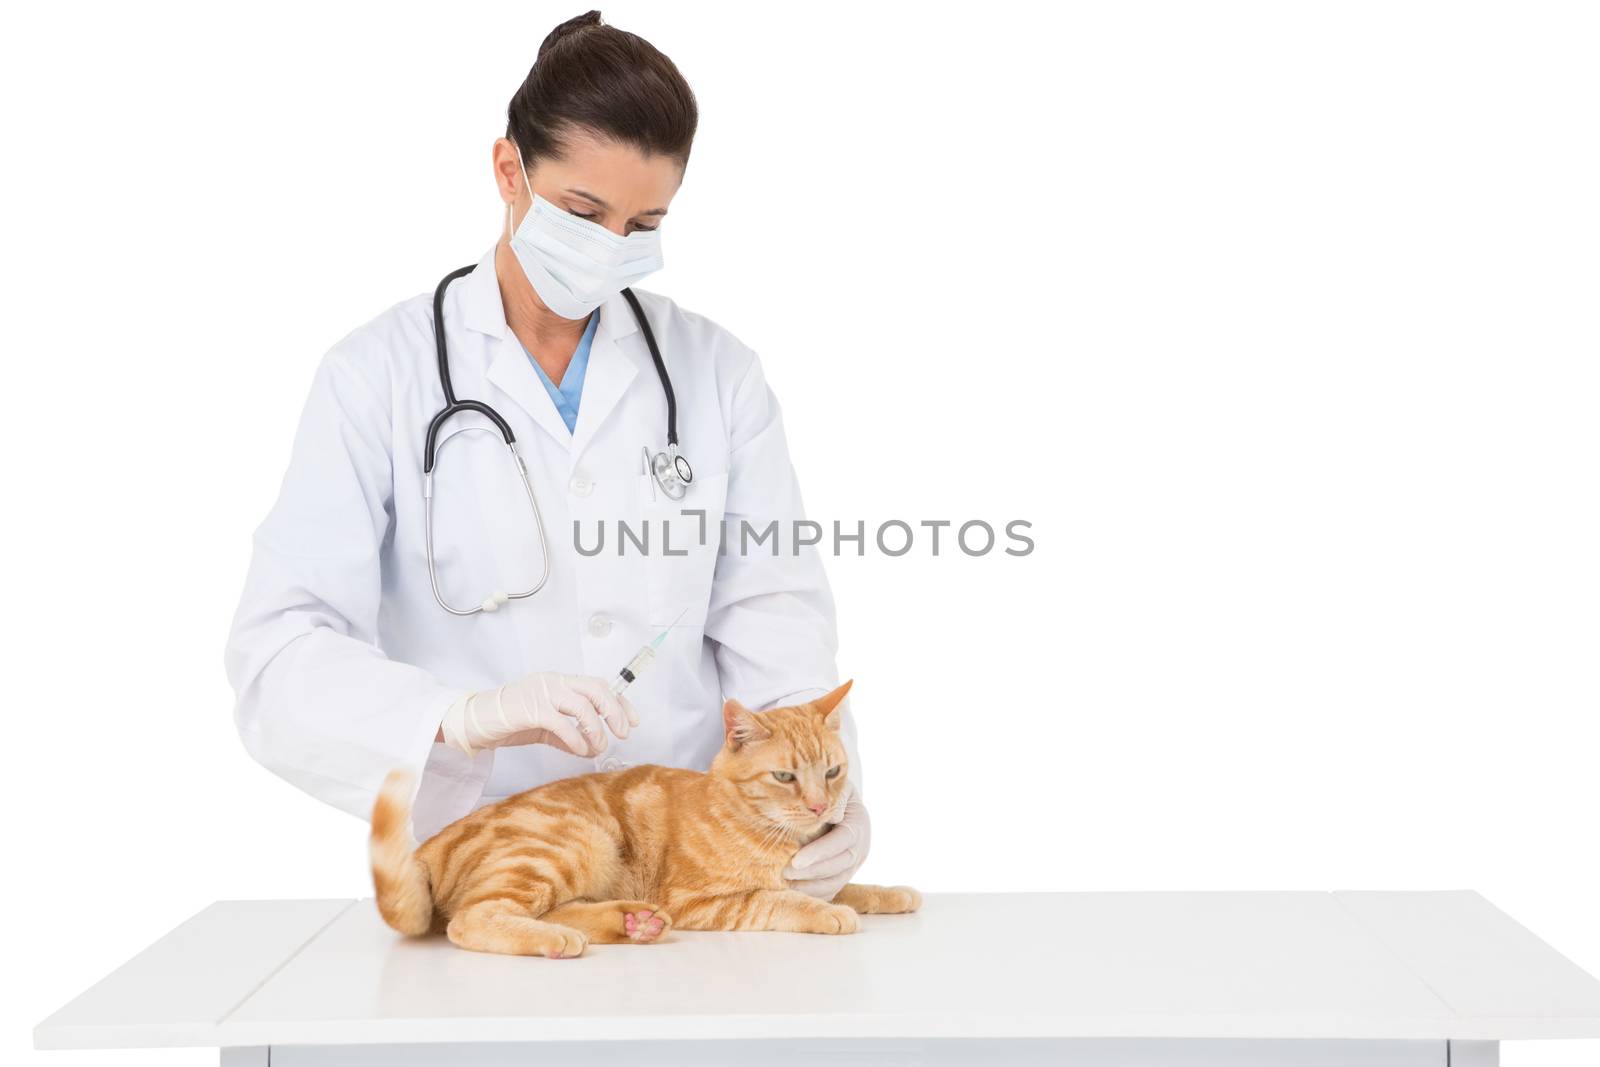 Veterinarian with surgical mask examining a cat  by Wavebreakmedia